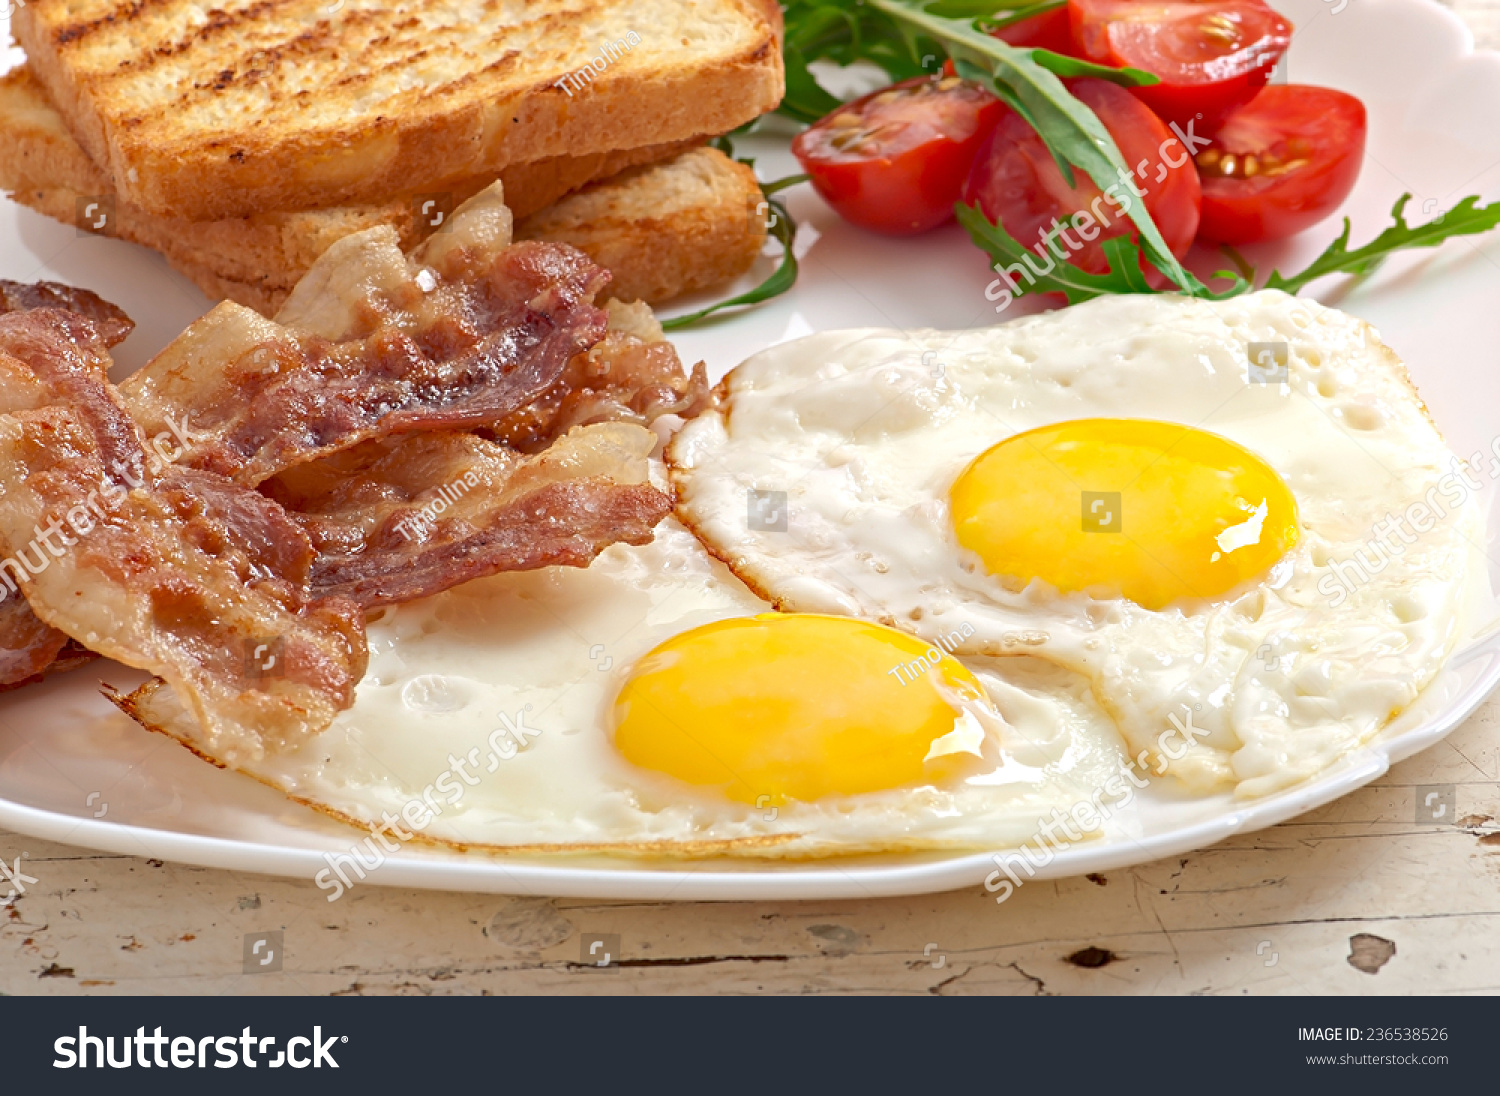 English Breakfast - Toast, Egg, Bacon And Vegetables Stock Photo ...